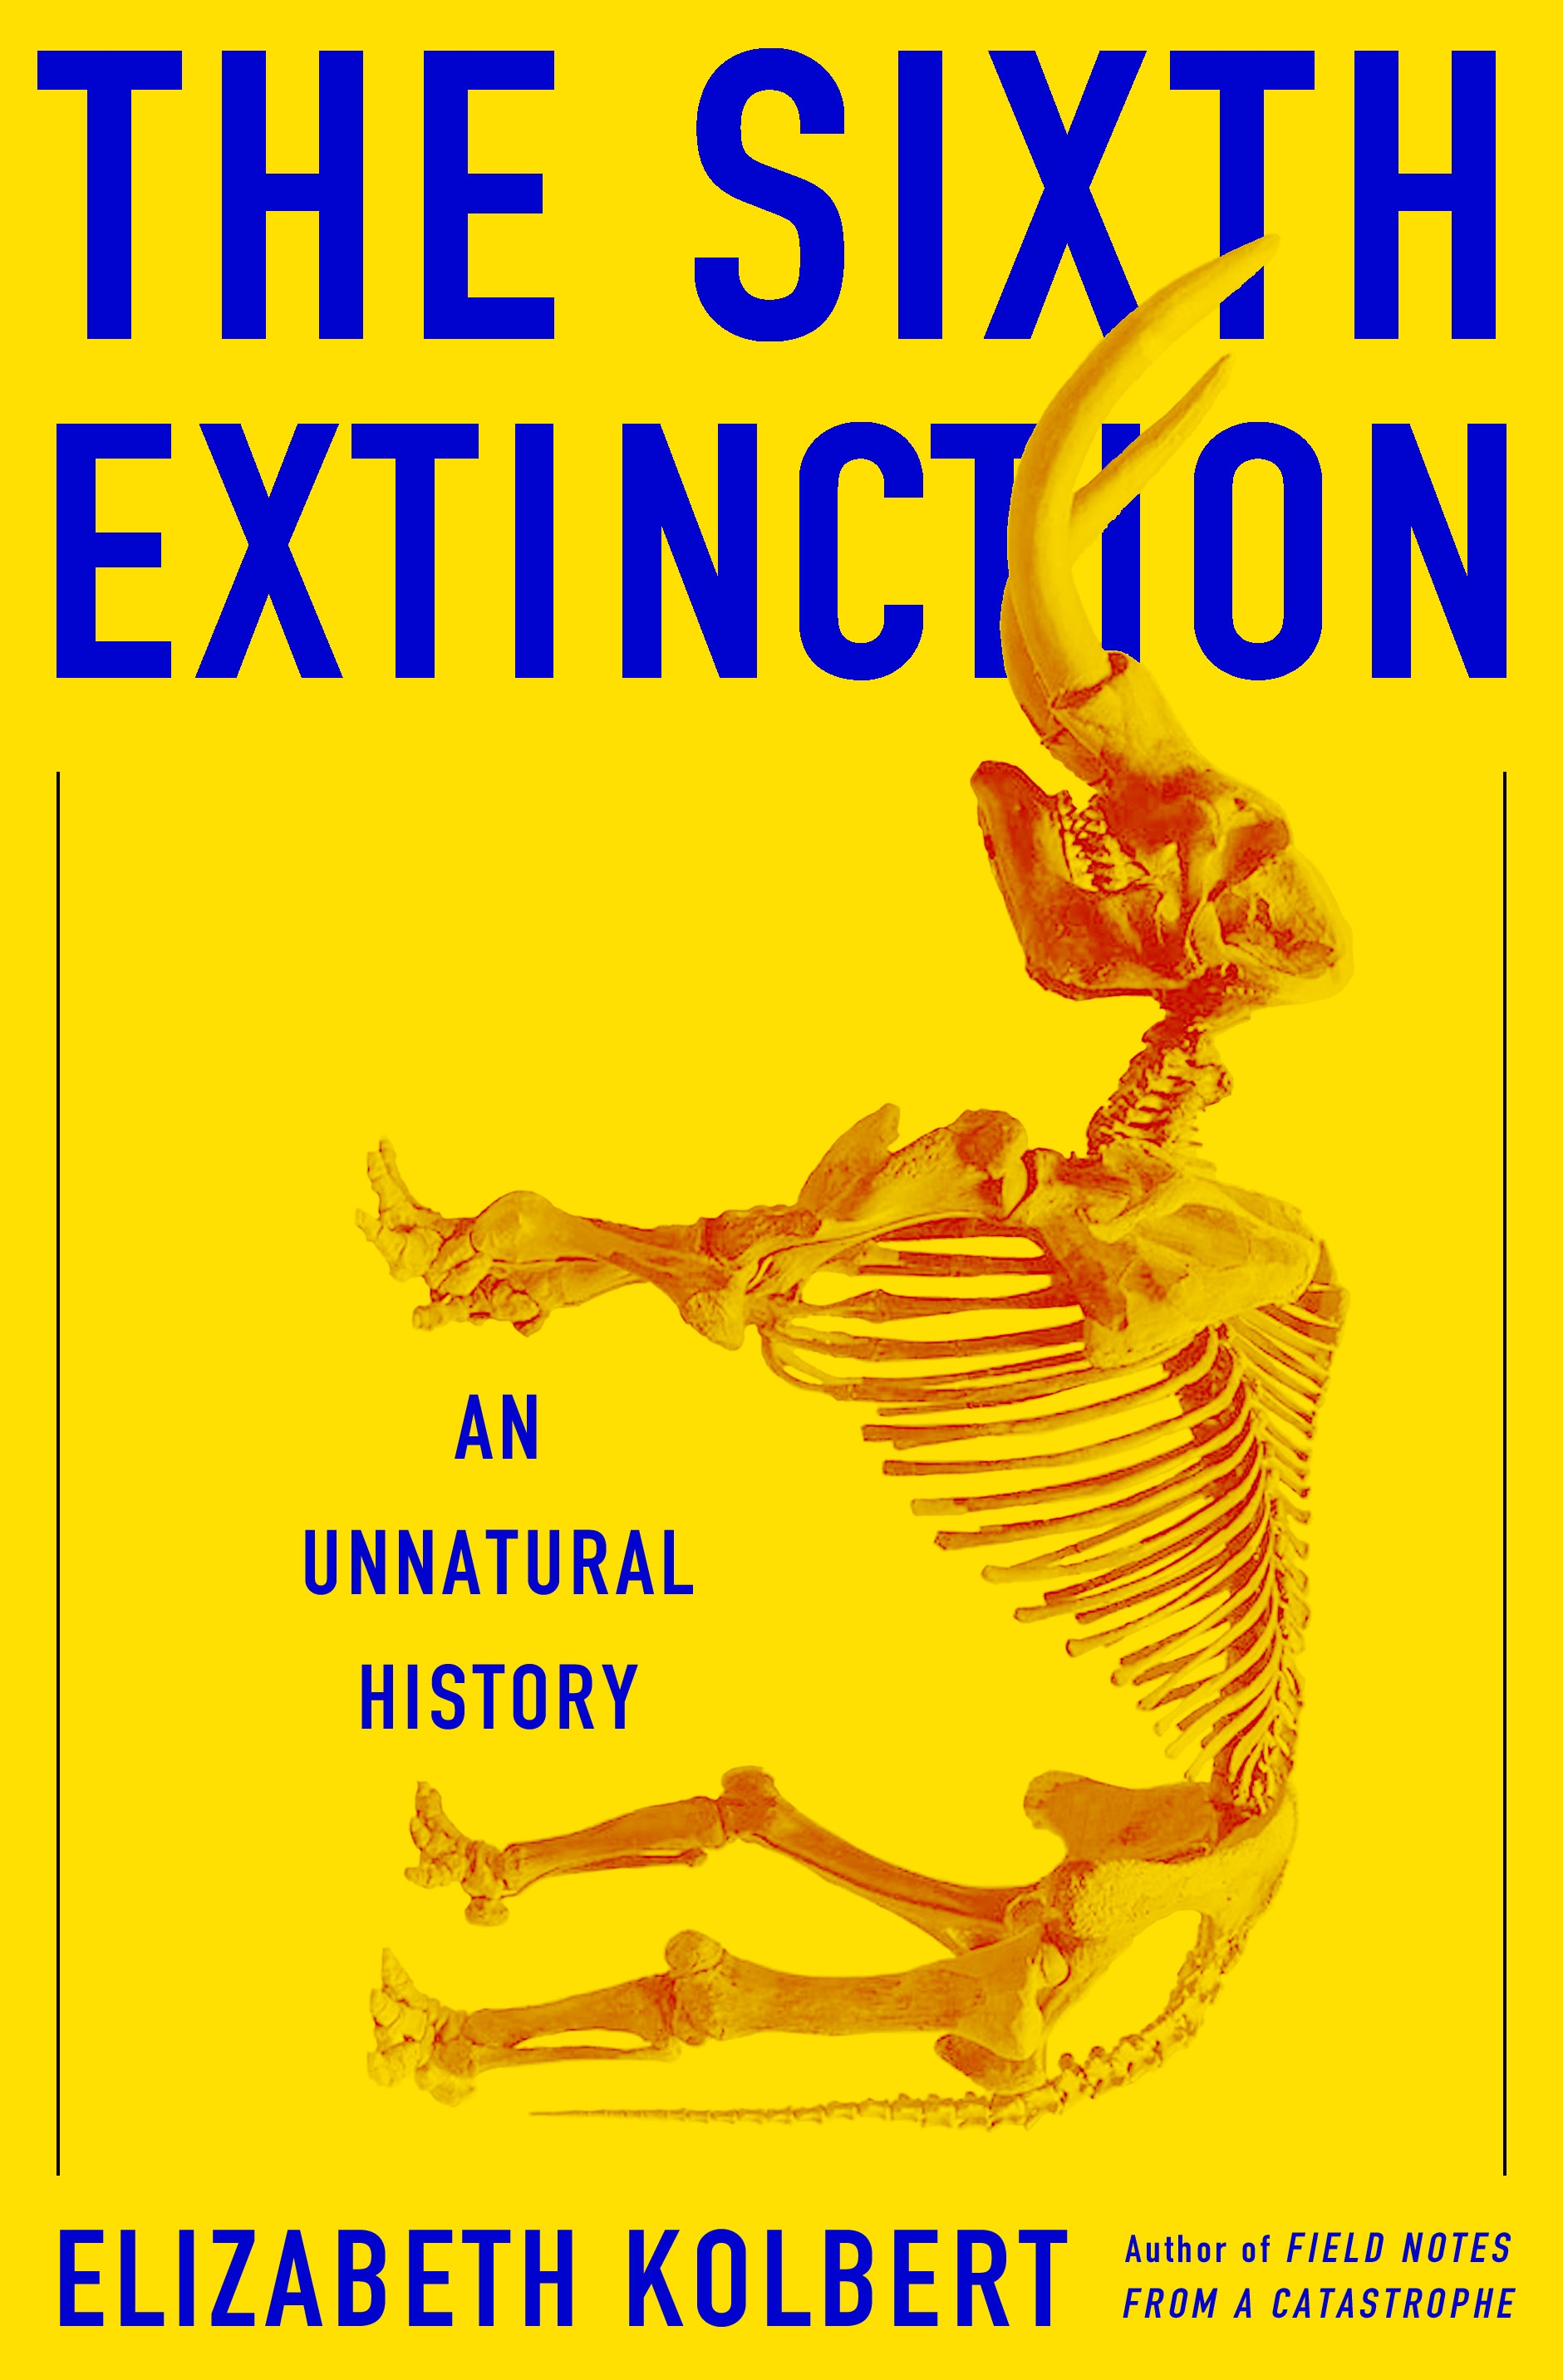 The Sixth Extinction book cover